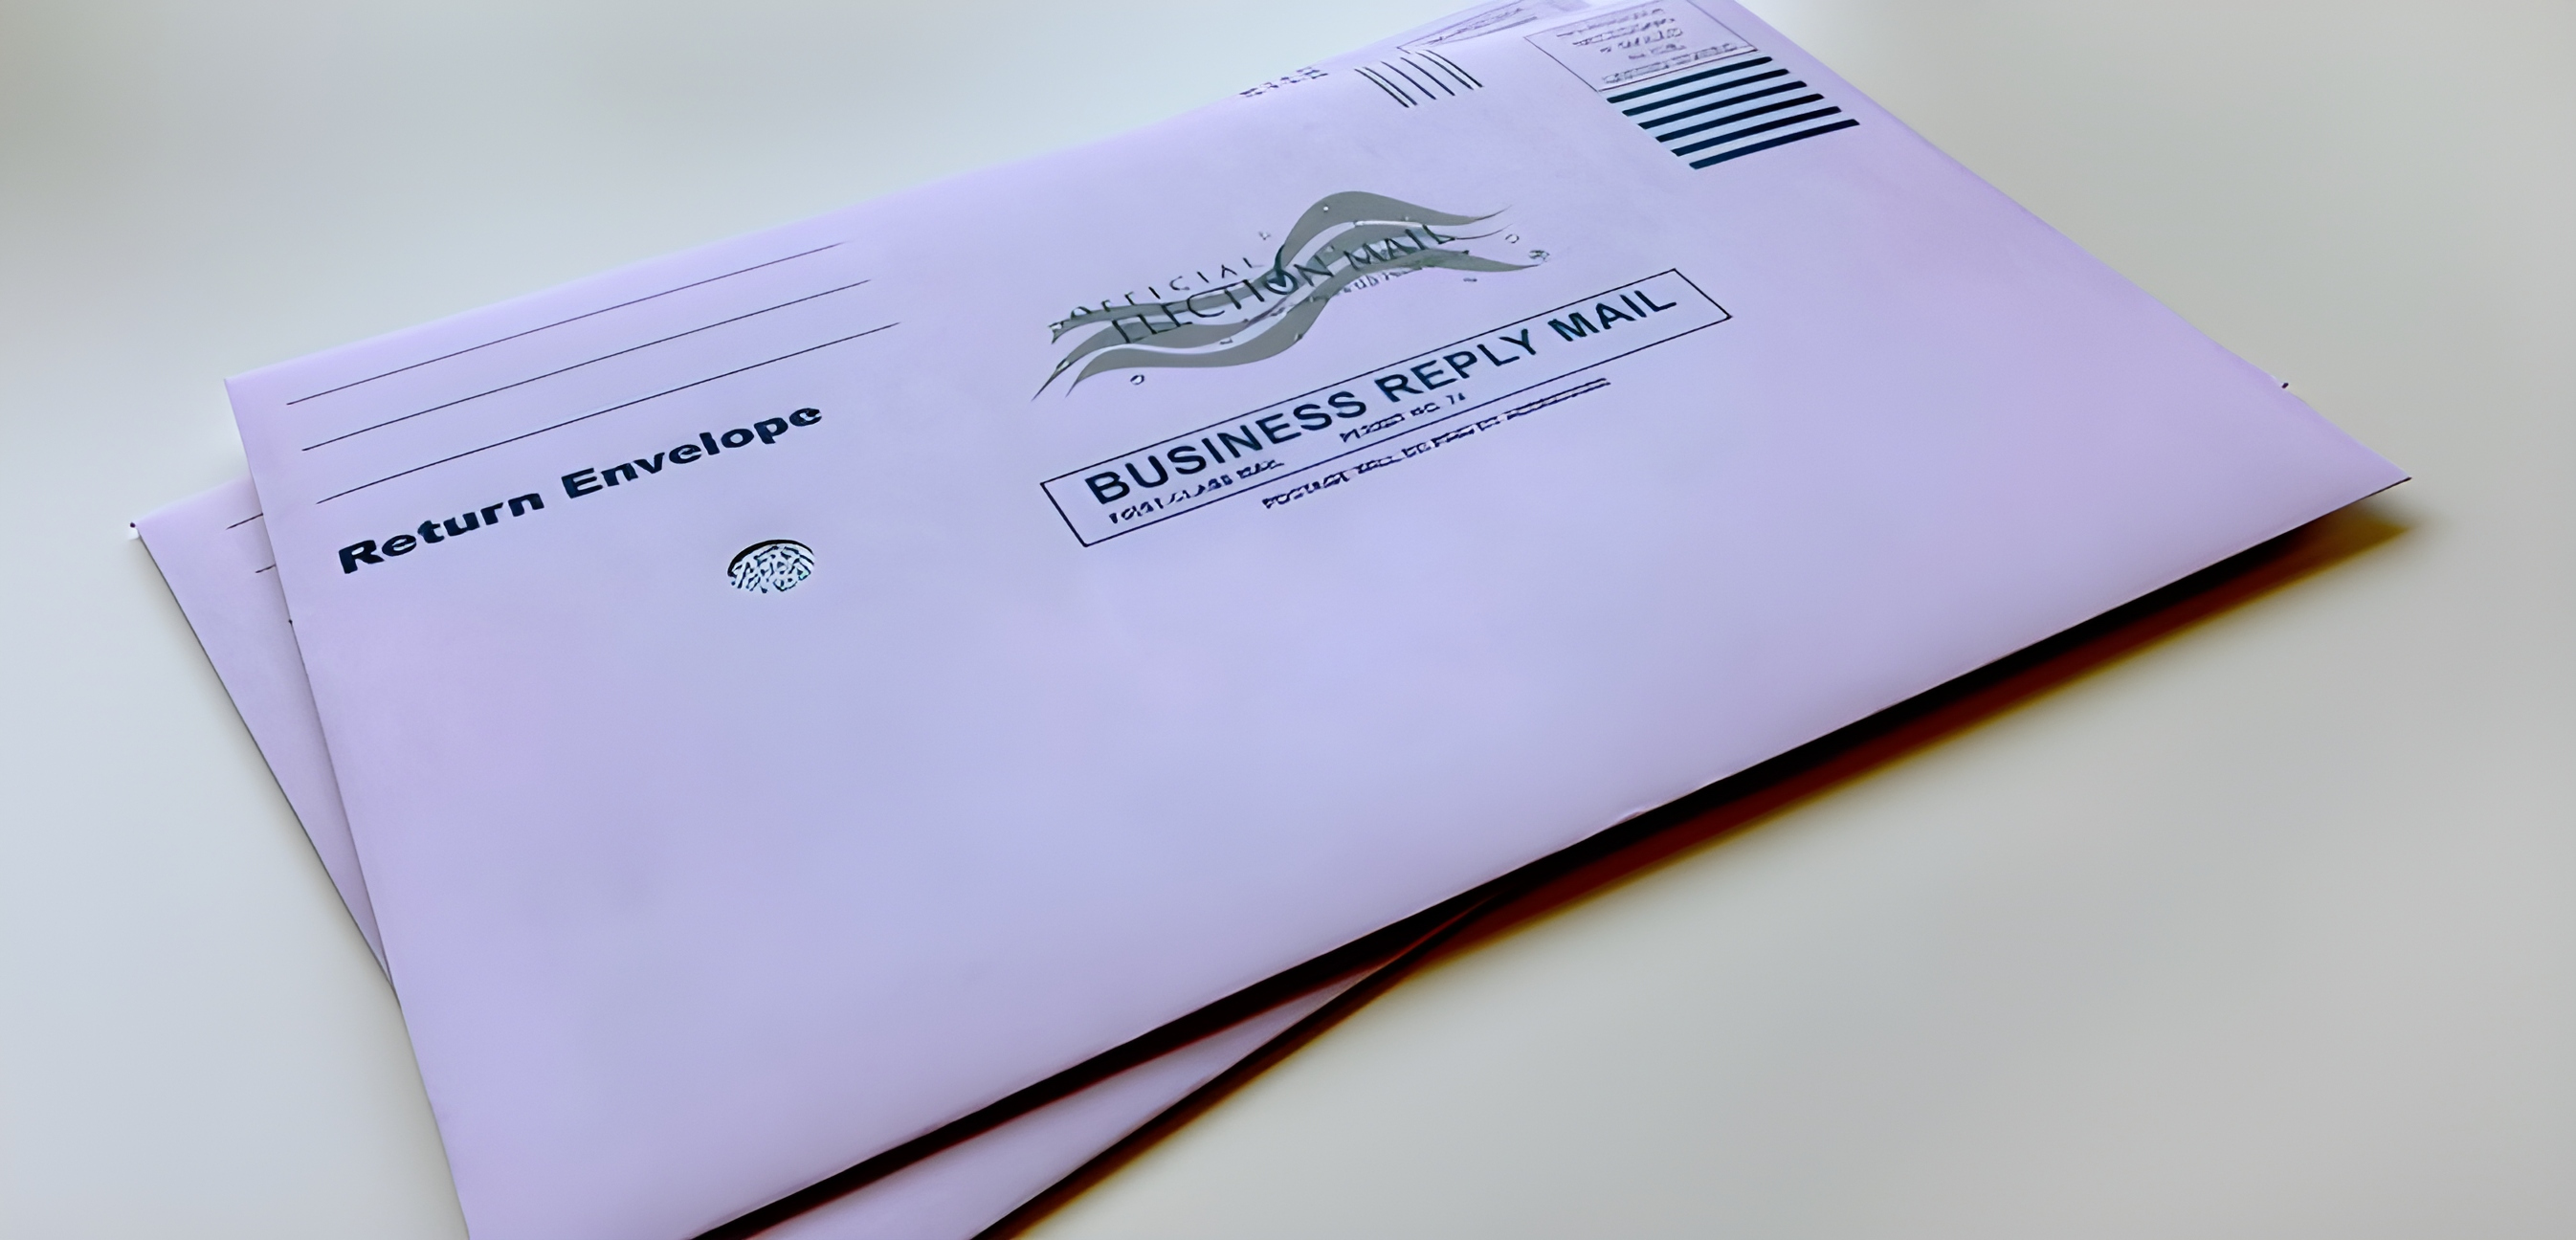 California: The Ballots are in the Mail.